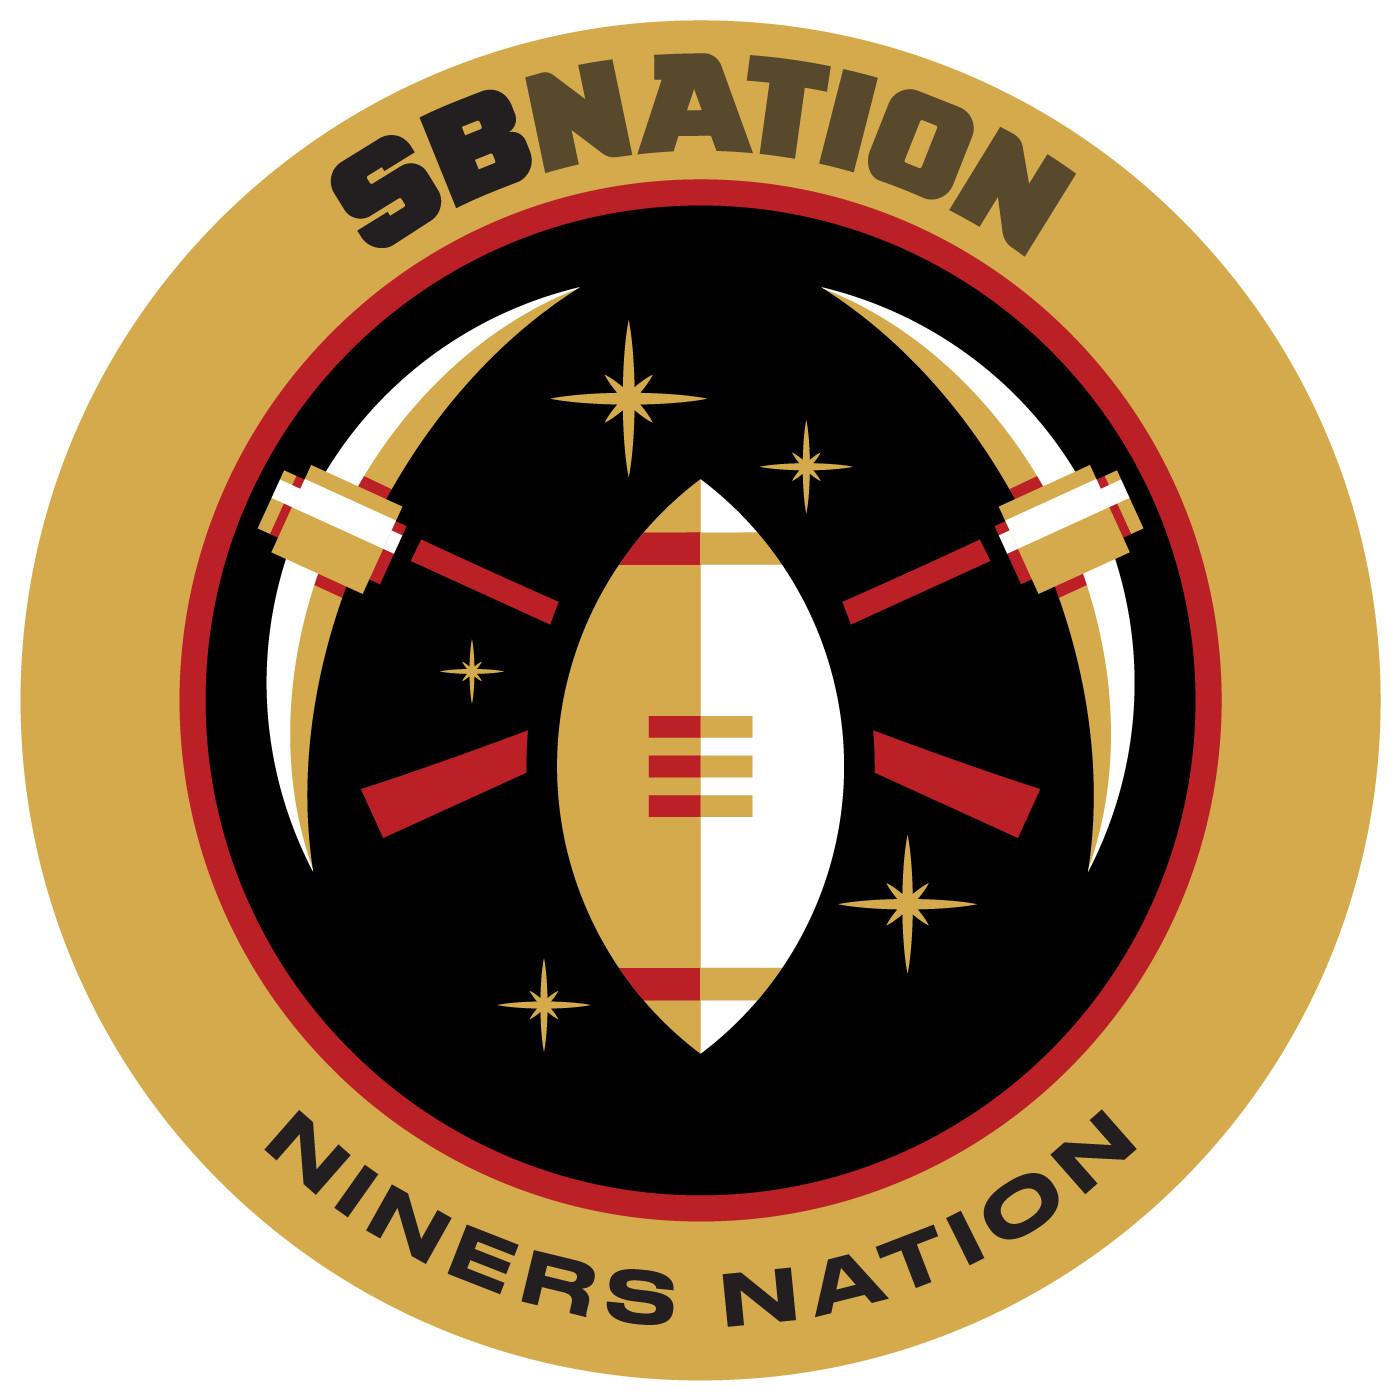 Niners Nation: for San Francisco 49ers fans | Listen via Stitcher for Podcasts1400 x 1400